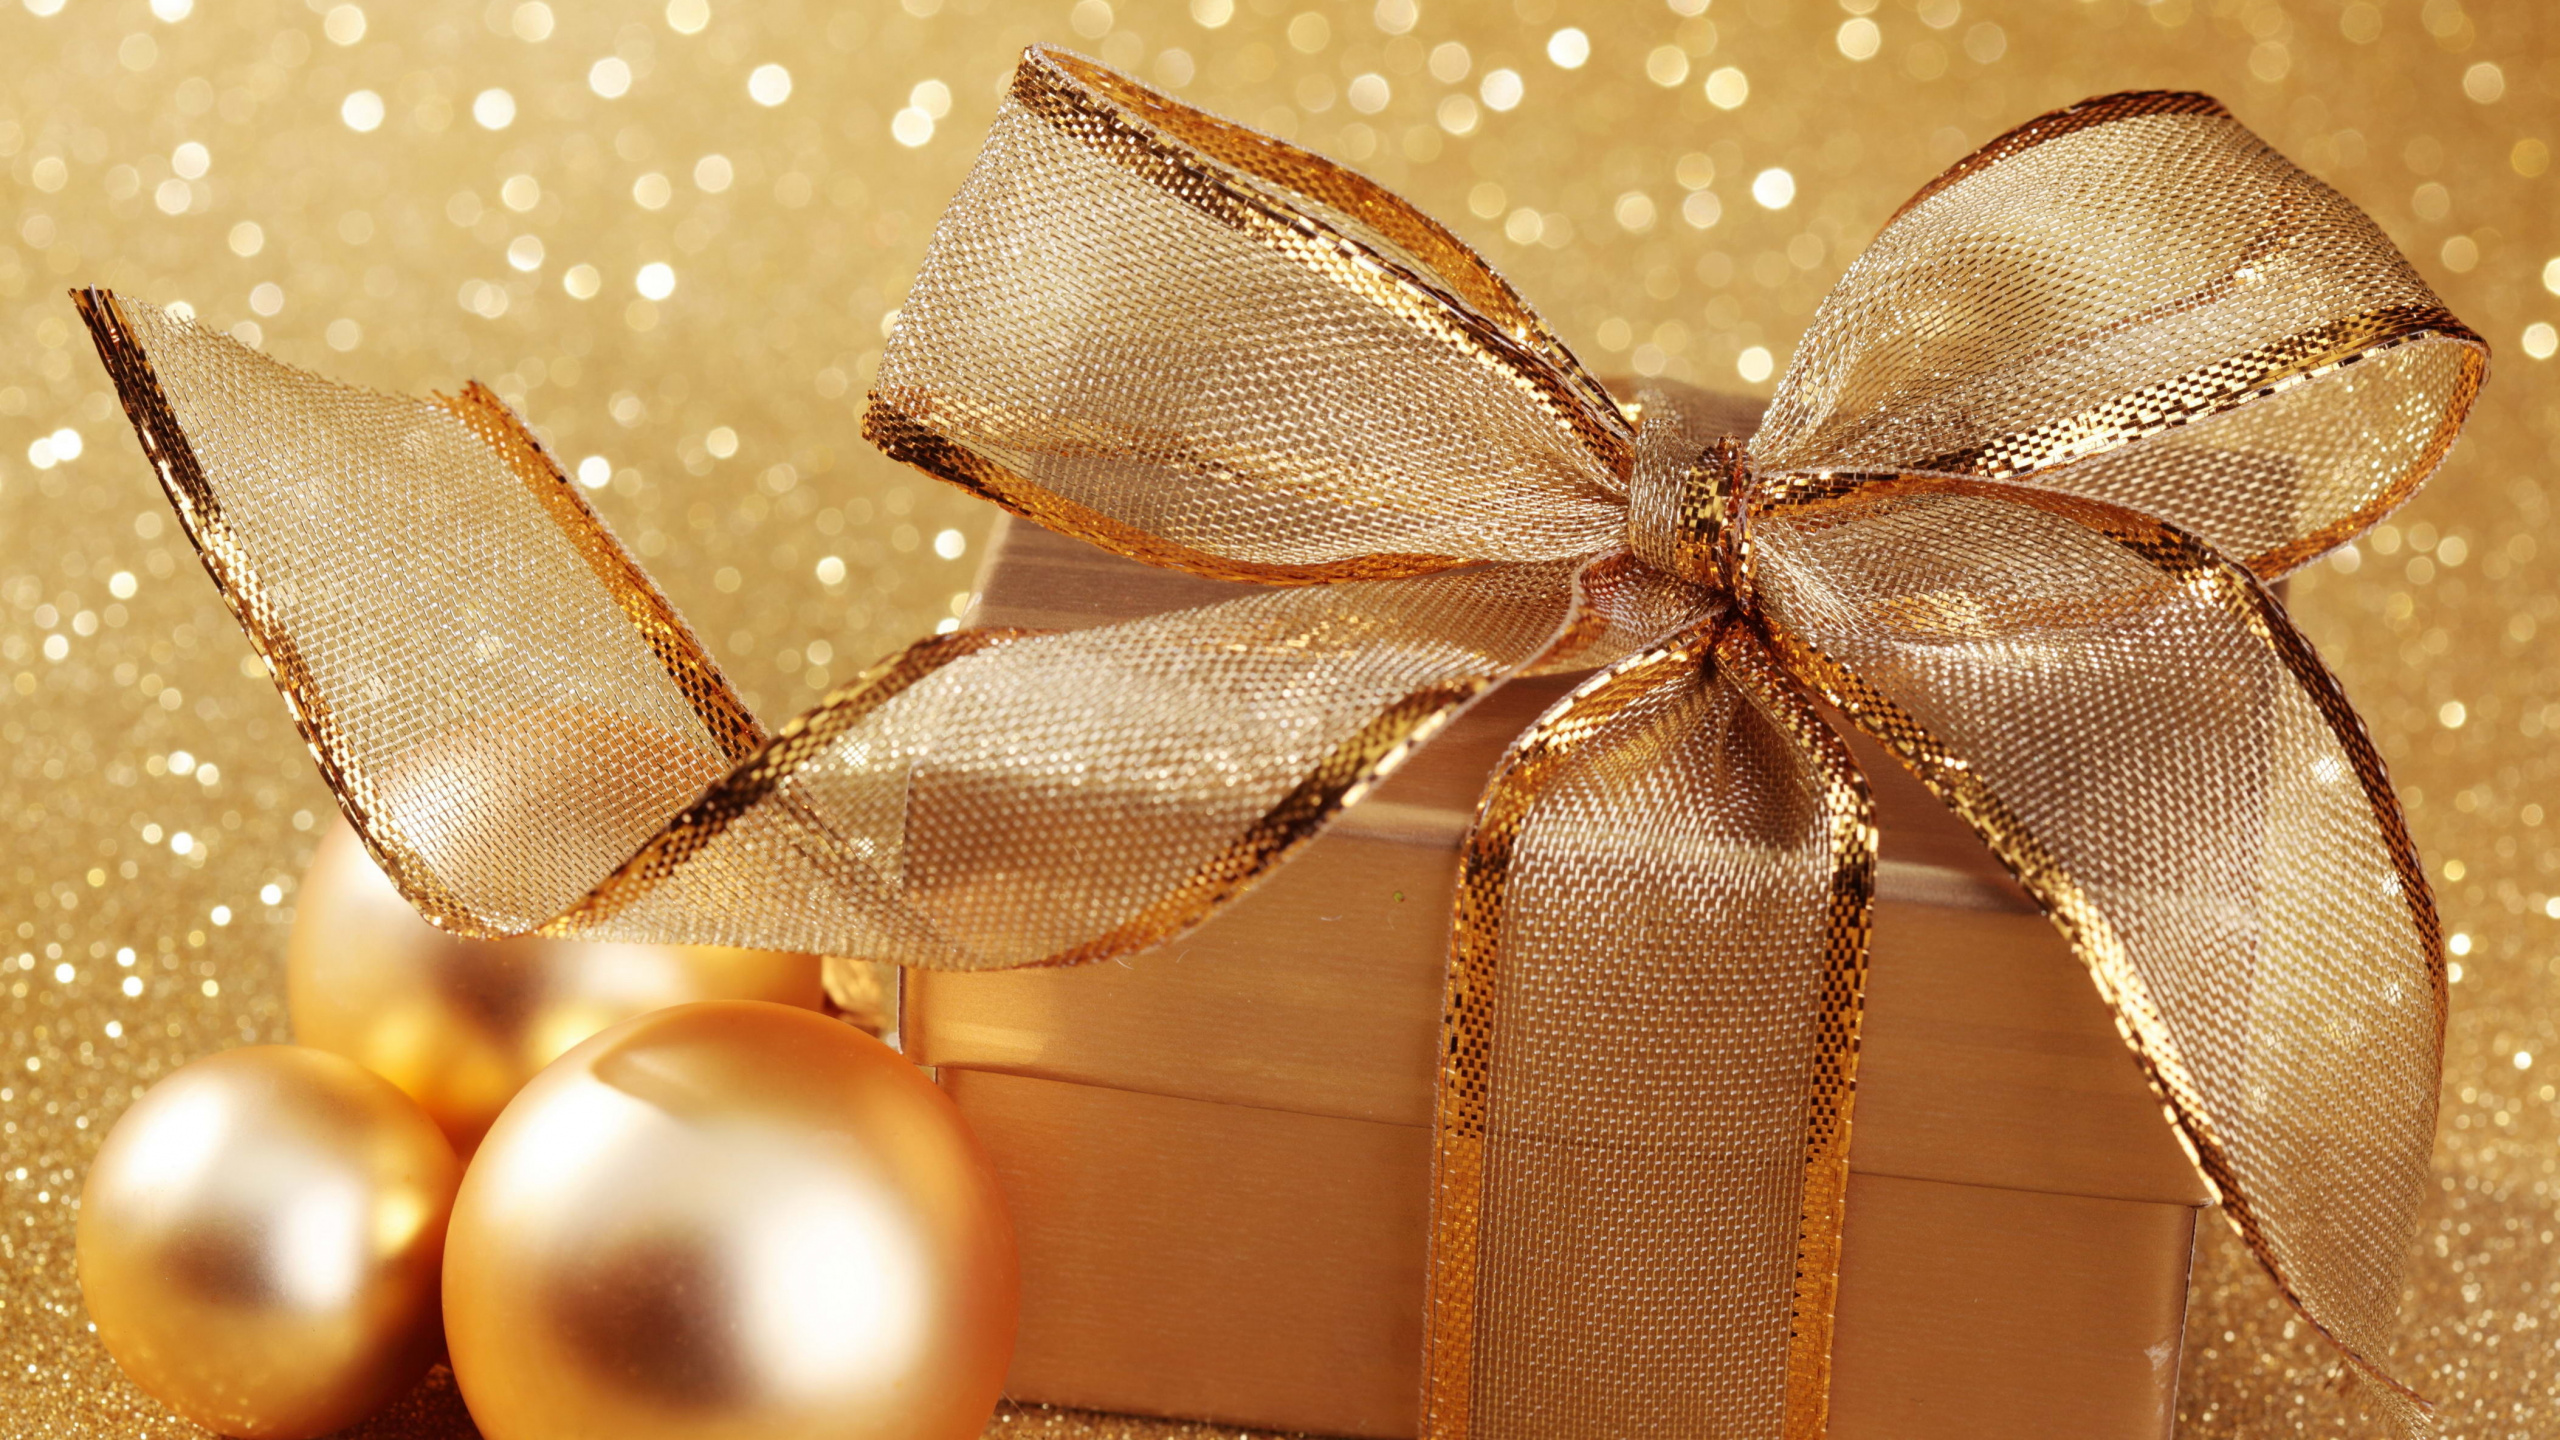 New Year, Christmas Day, Holiday, Ribbon, Present. Wallpaper in 2560x1440 Resolution